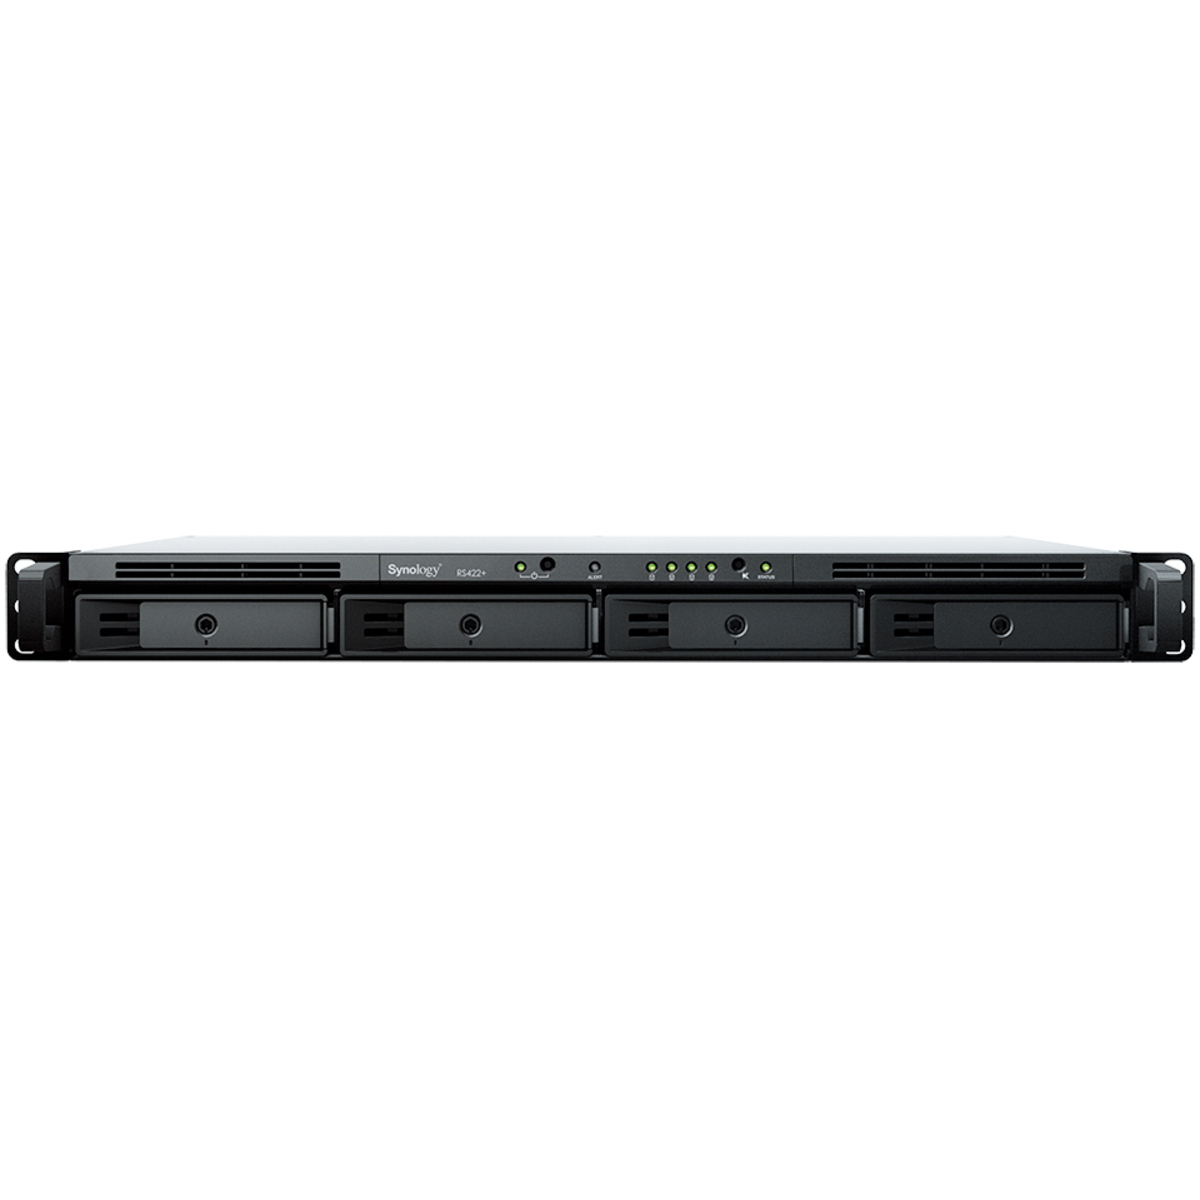 Synology RackStation RS422+ 48tb 4-Bay RackMount Personal / Basic Home / Small Office NAS - Network Attached Storage Device 4x12tb Seagate IronWolf Pro ST12000NT001 3.5 7200rpm SATA 6Gb/s HDD NAS Class Drives Installed - Burn-In Tested - ON SALE RackStation RS422+